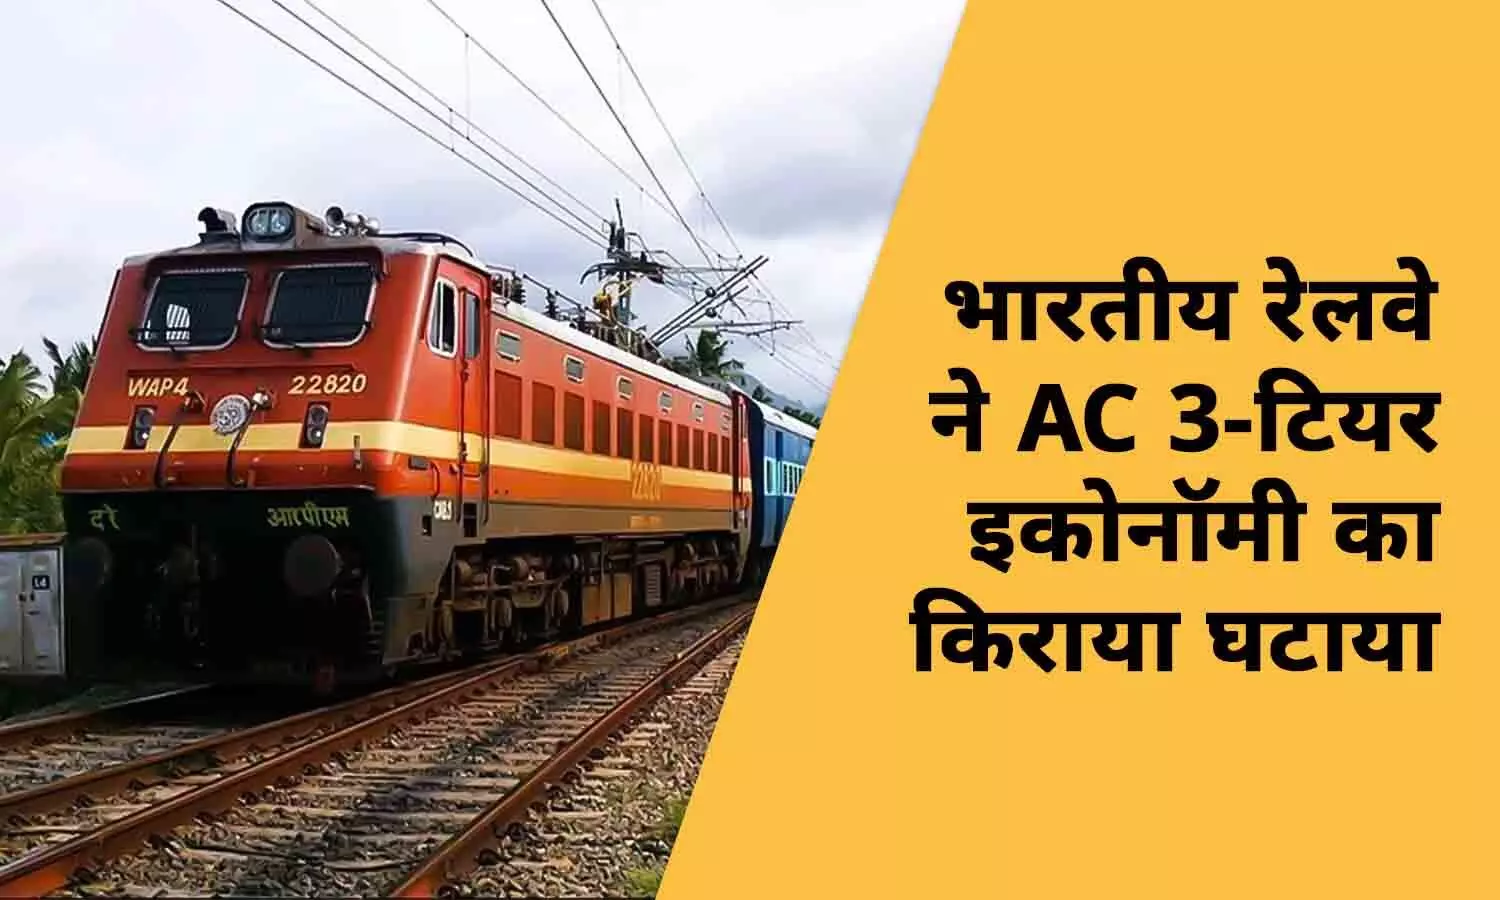 journey of AC 3 tier economy of trains became cheaper